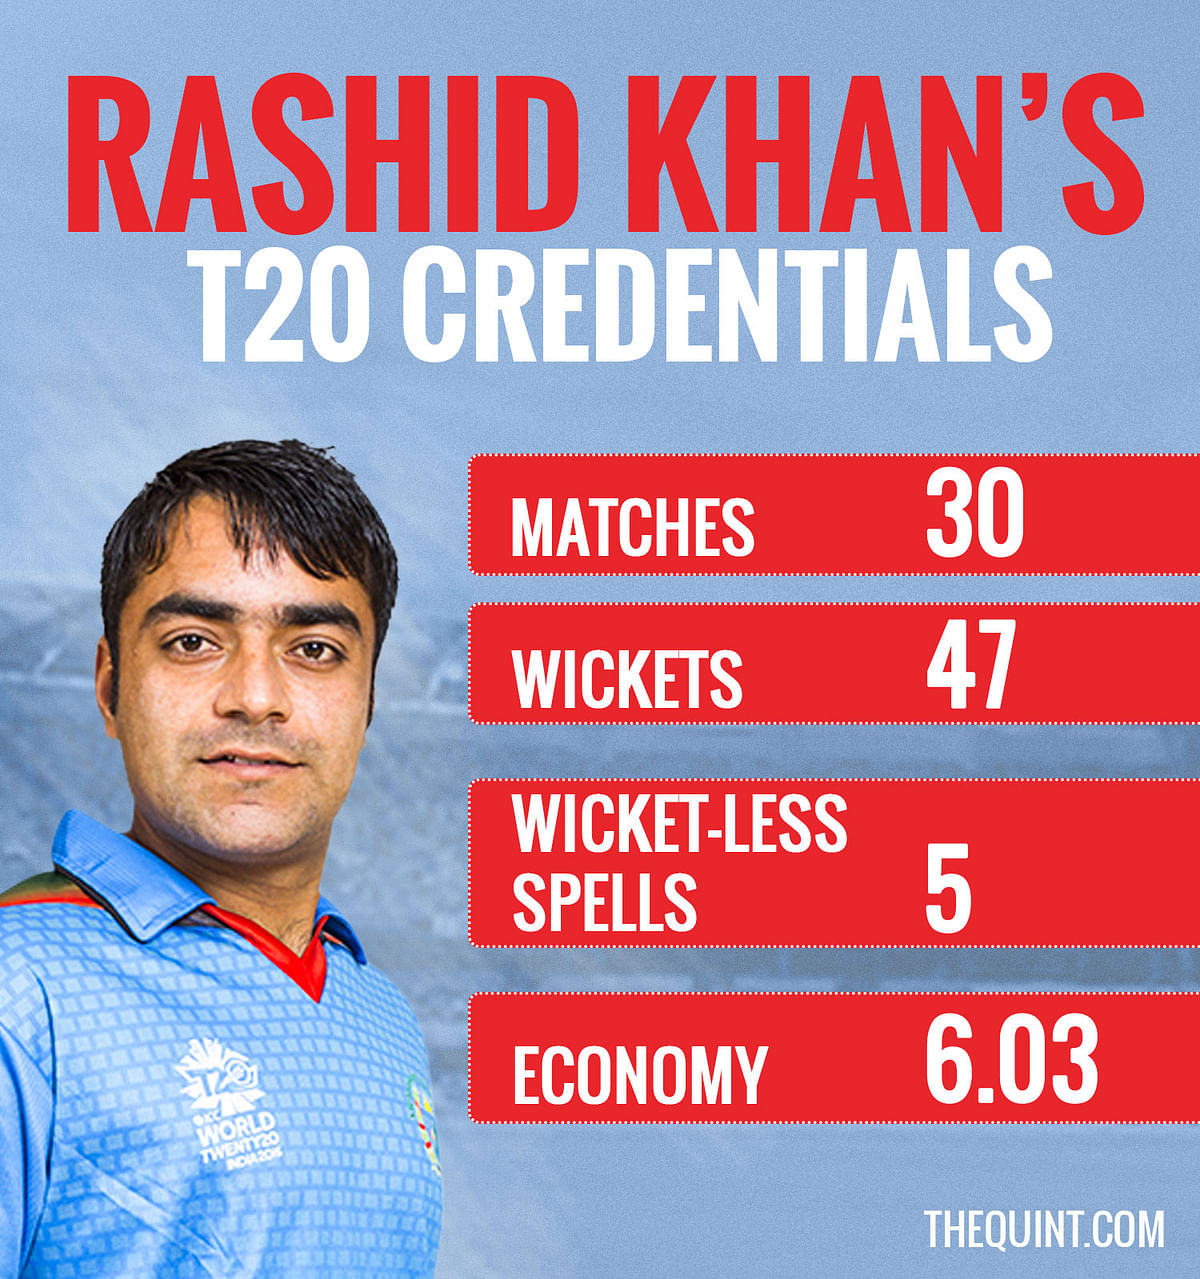 World’s number 1 T20 bowler goes unsold but an 18-year-old Afghan bowler was bought for Rs 4 crores.